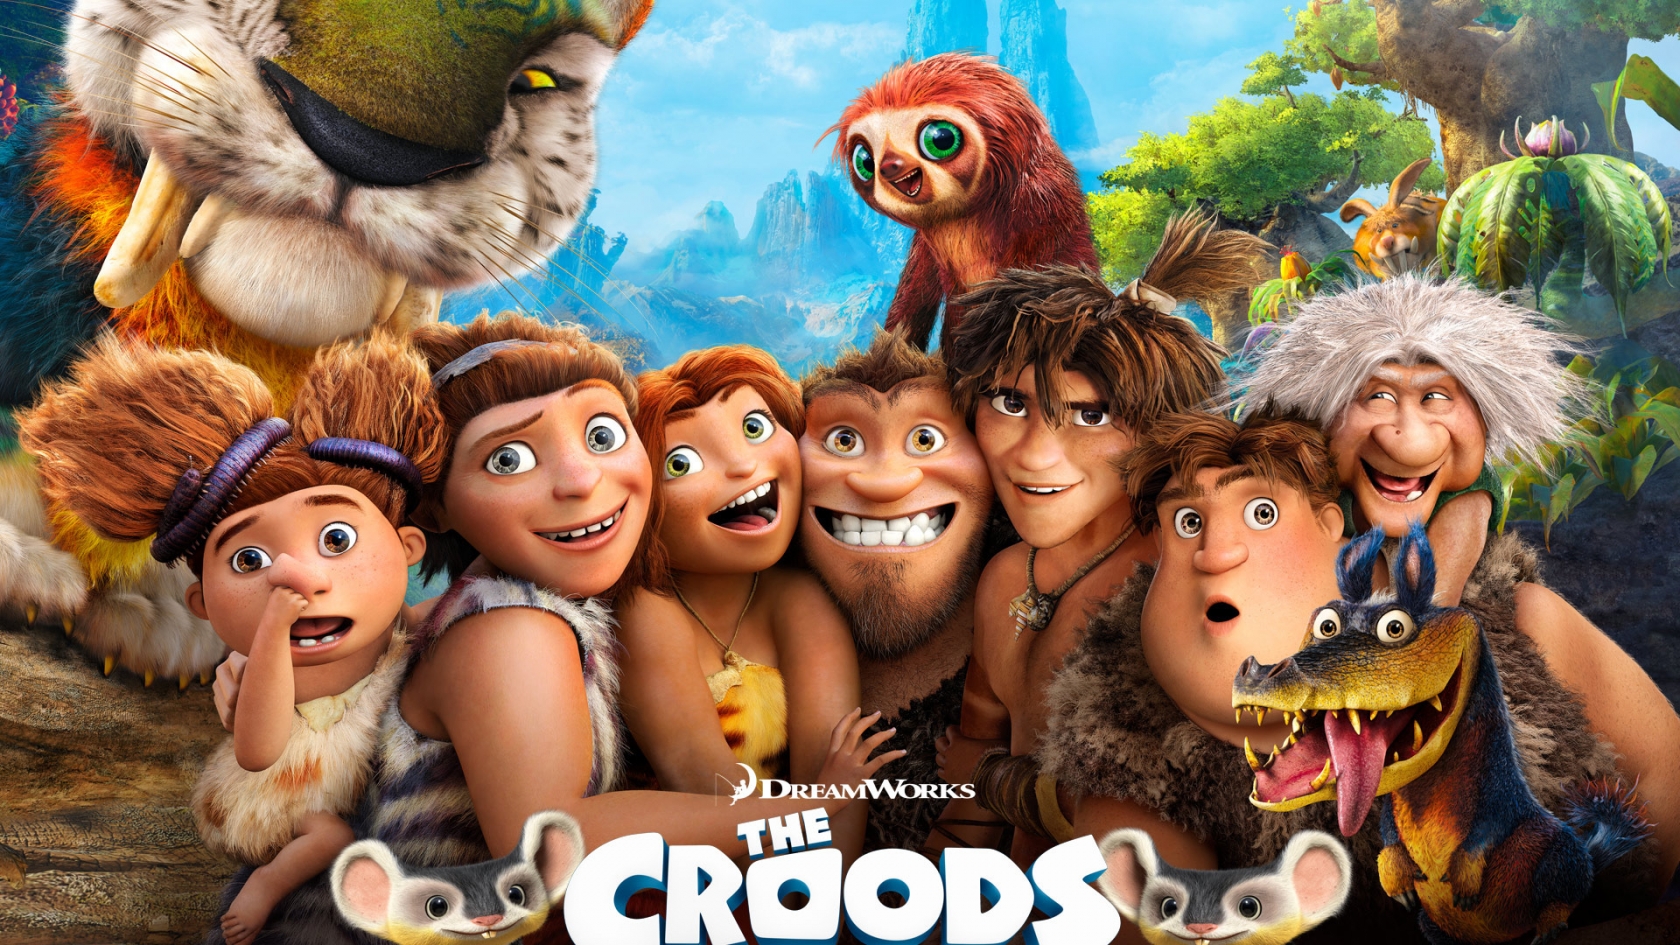 The Croods for 1680 x 945 HDTV resolution